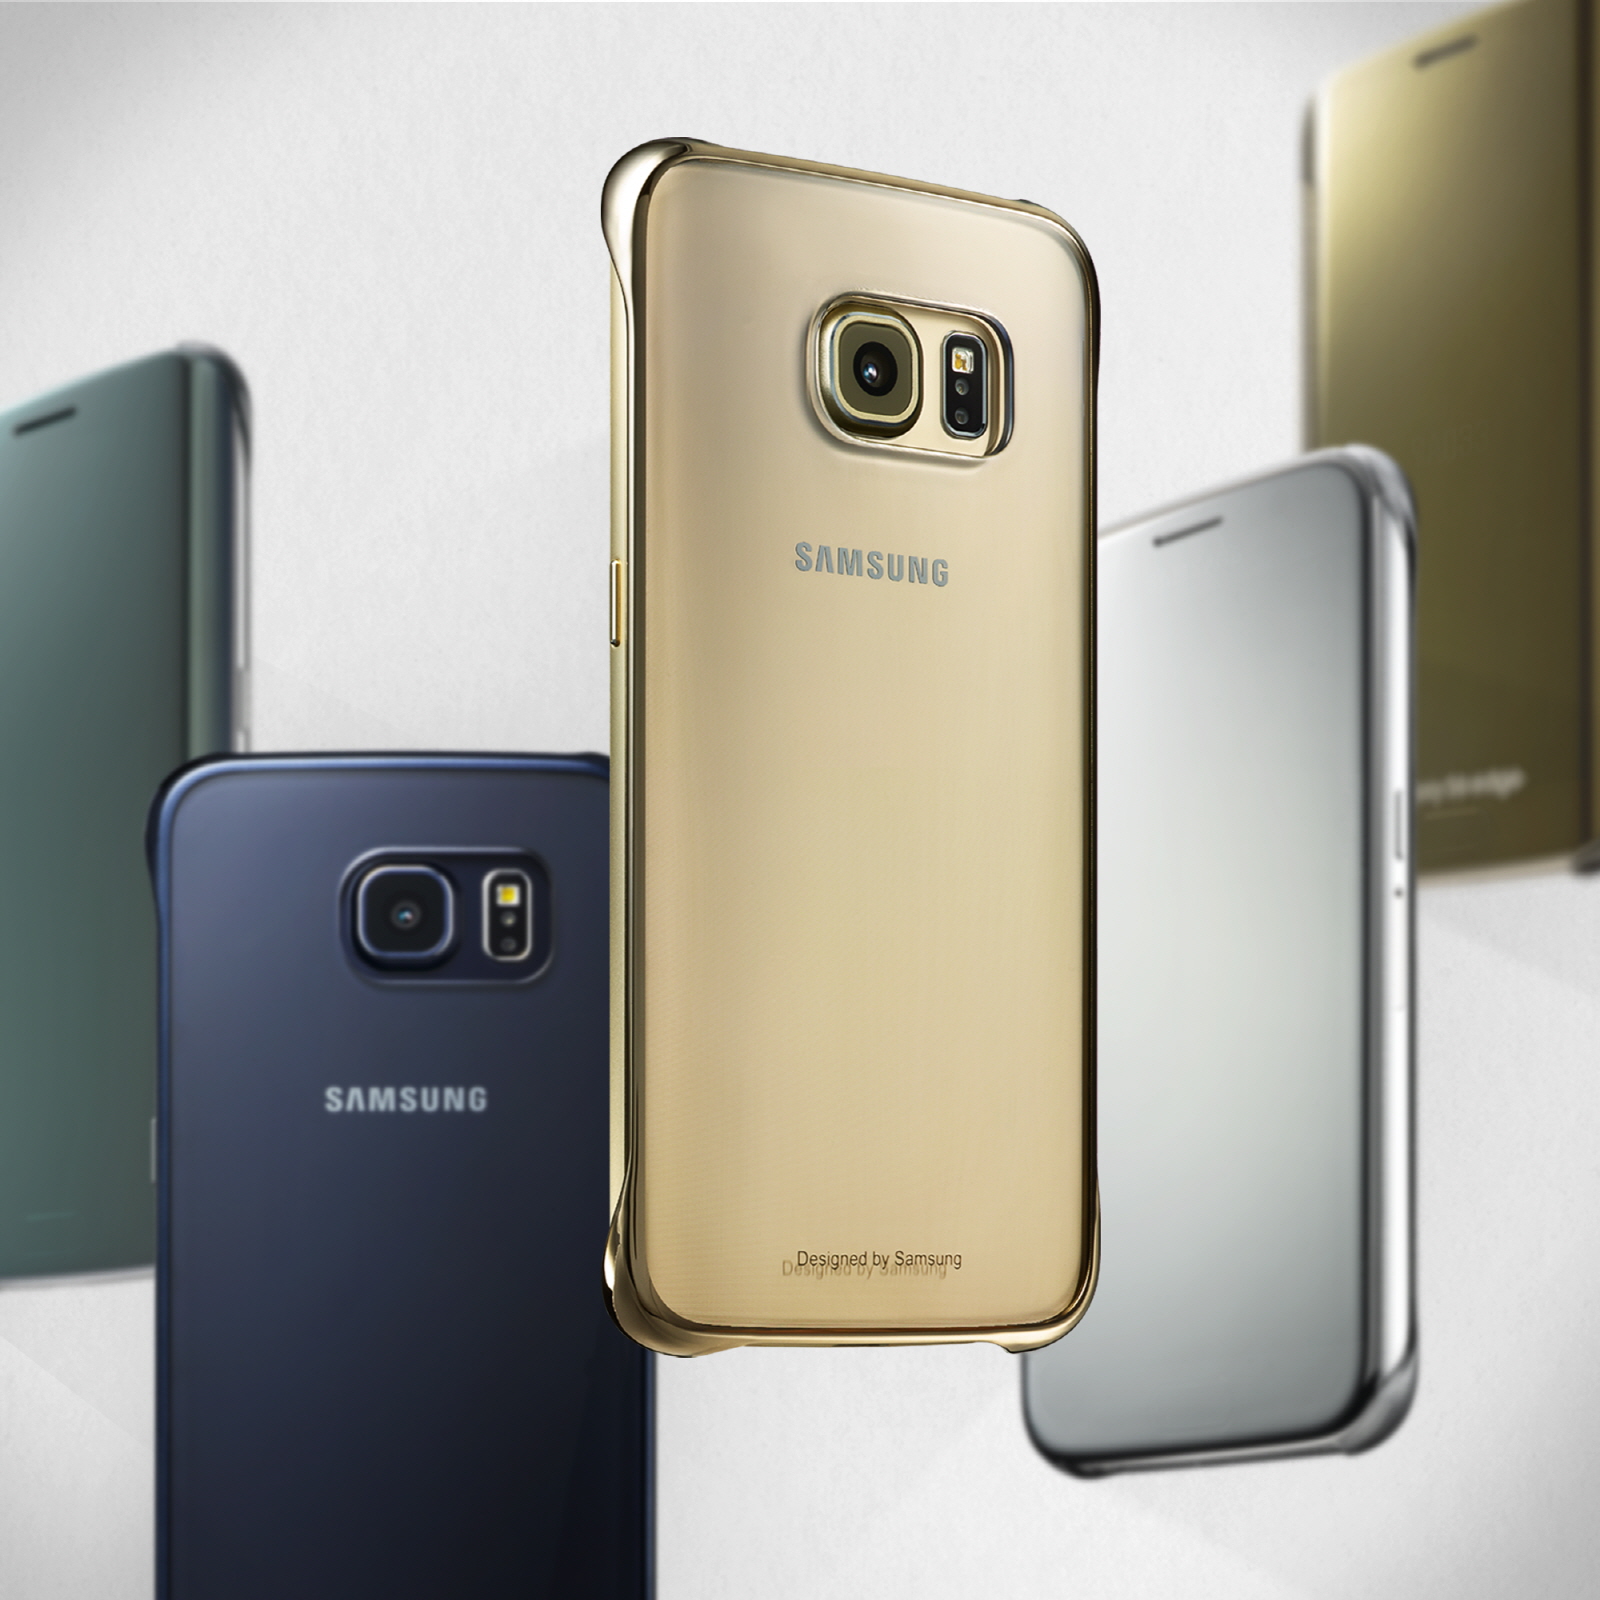 Debuts Rich Collection for Galaxy S6 and Galaxy S6 edge - Samsung Newsroom Global Media